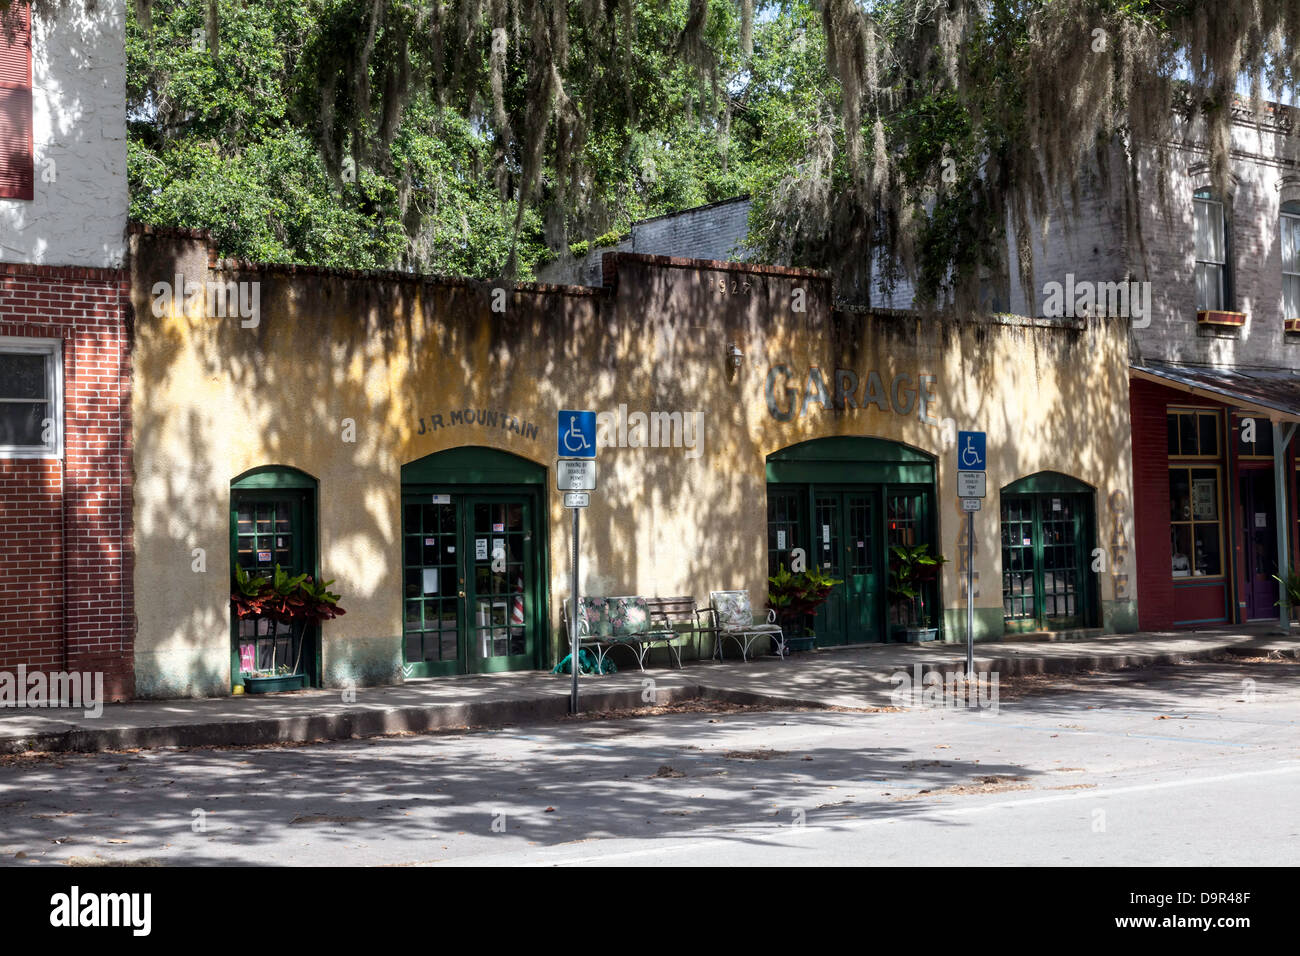 Picturesque former garage and cafe converted into an antique shop in the historic district of Micanopy, Florida. Stock Photo